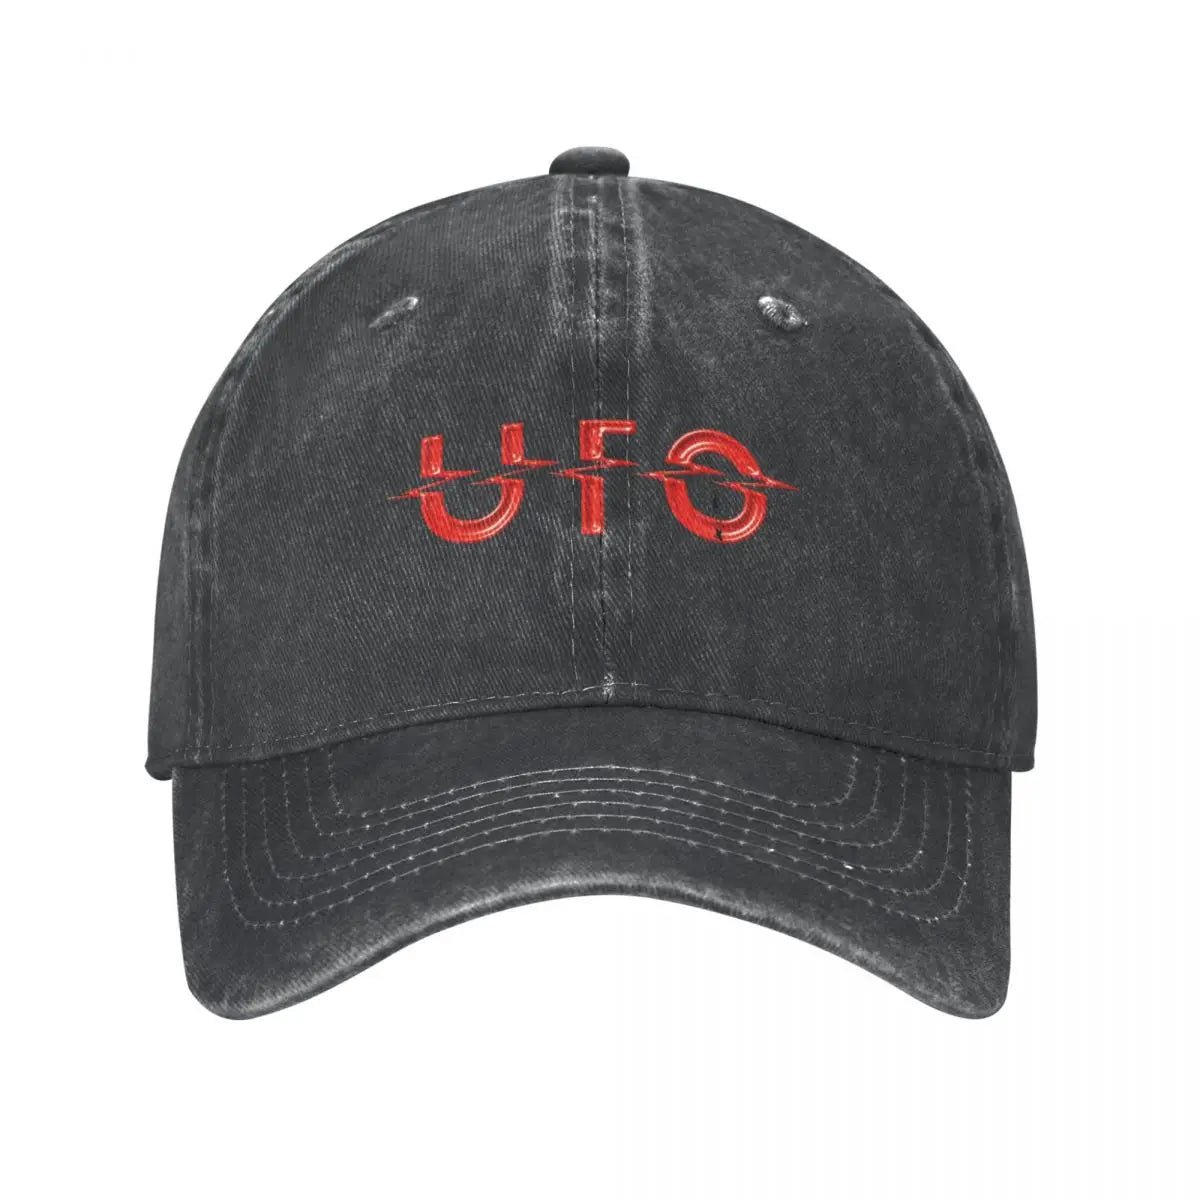 UFO are an English rock band that was formed in London in 1968 Rock Bottom Hat Ball Cap Girl's Men's - Lizard Vigilante